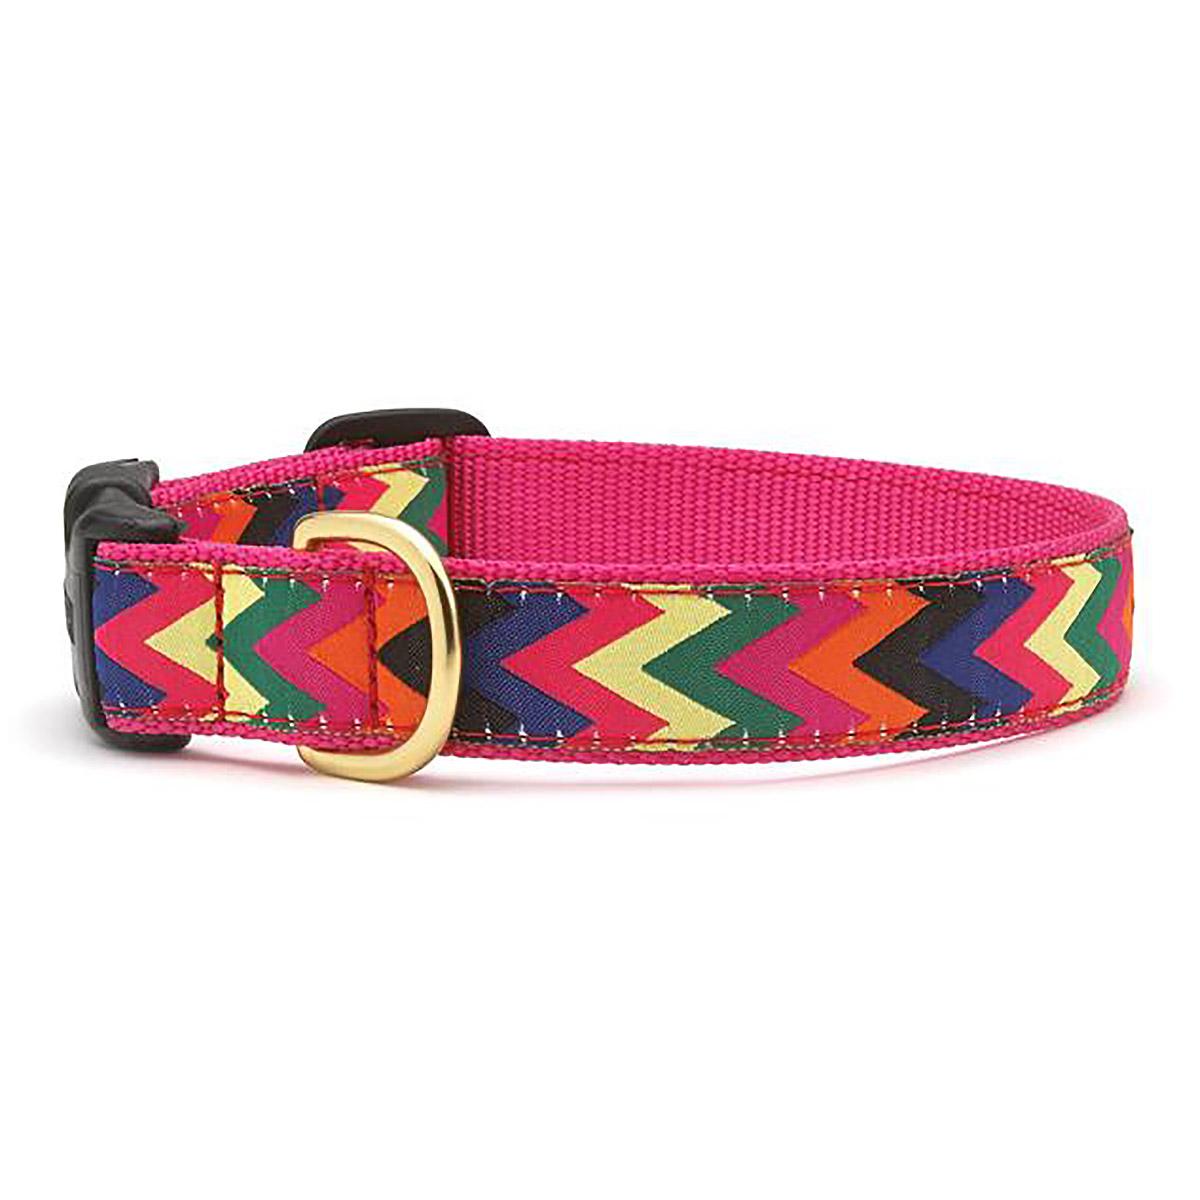 Zig Zag Wag Dog Collar by Up Country